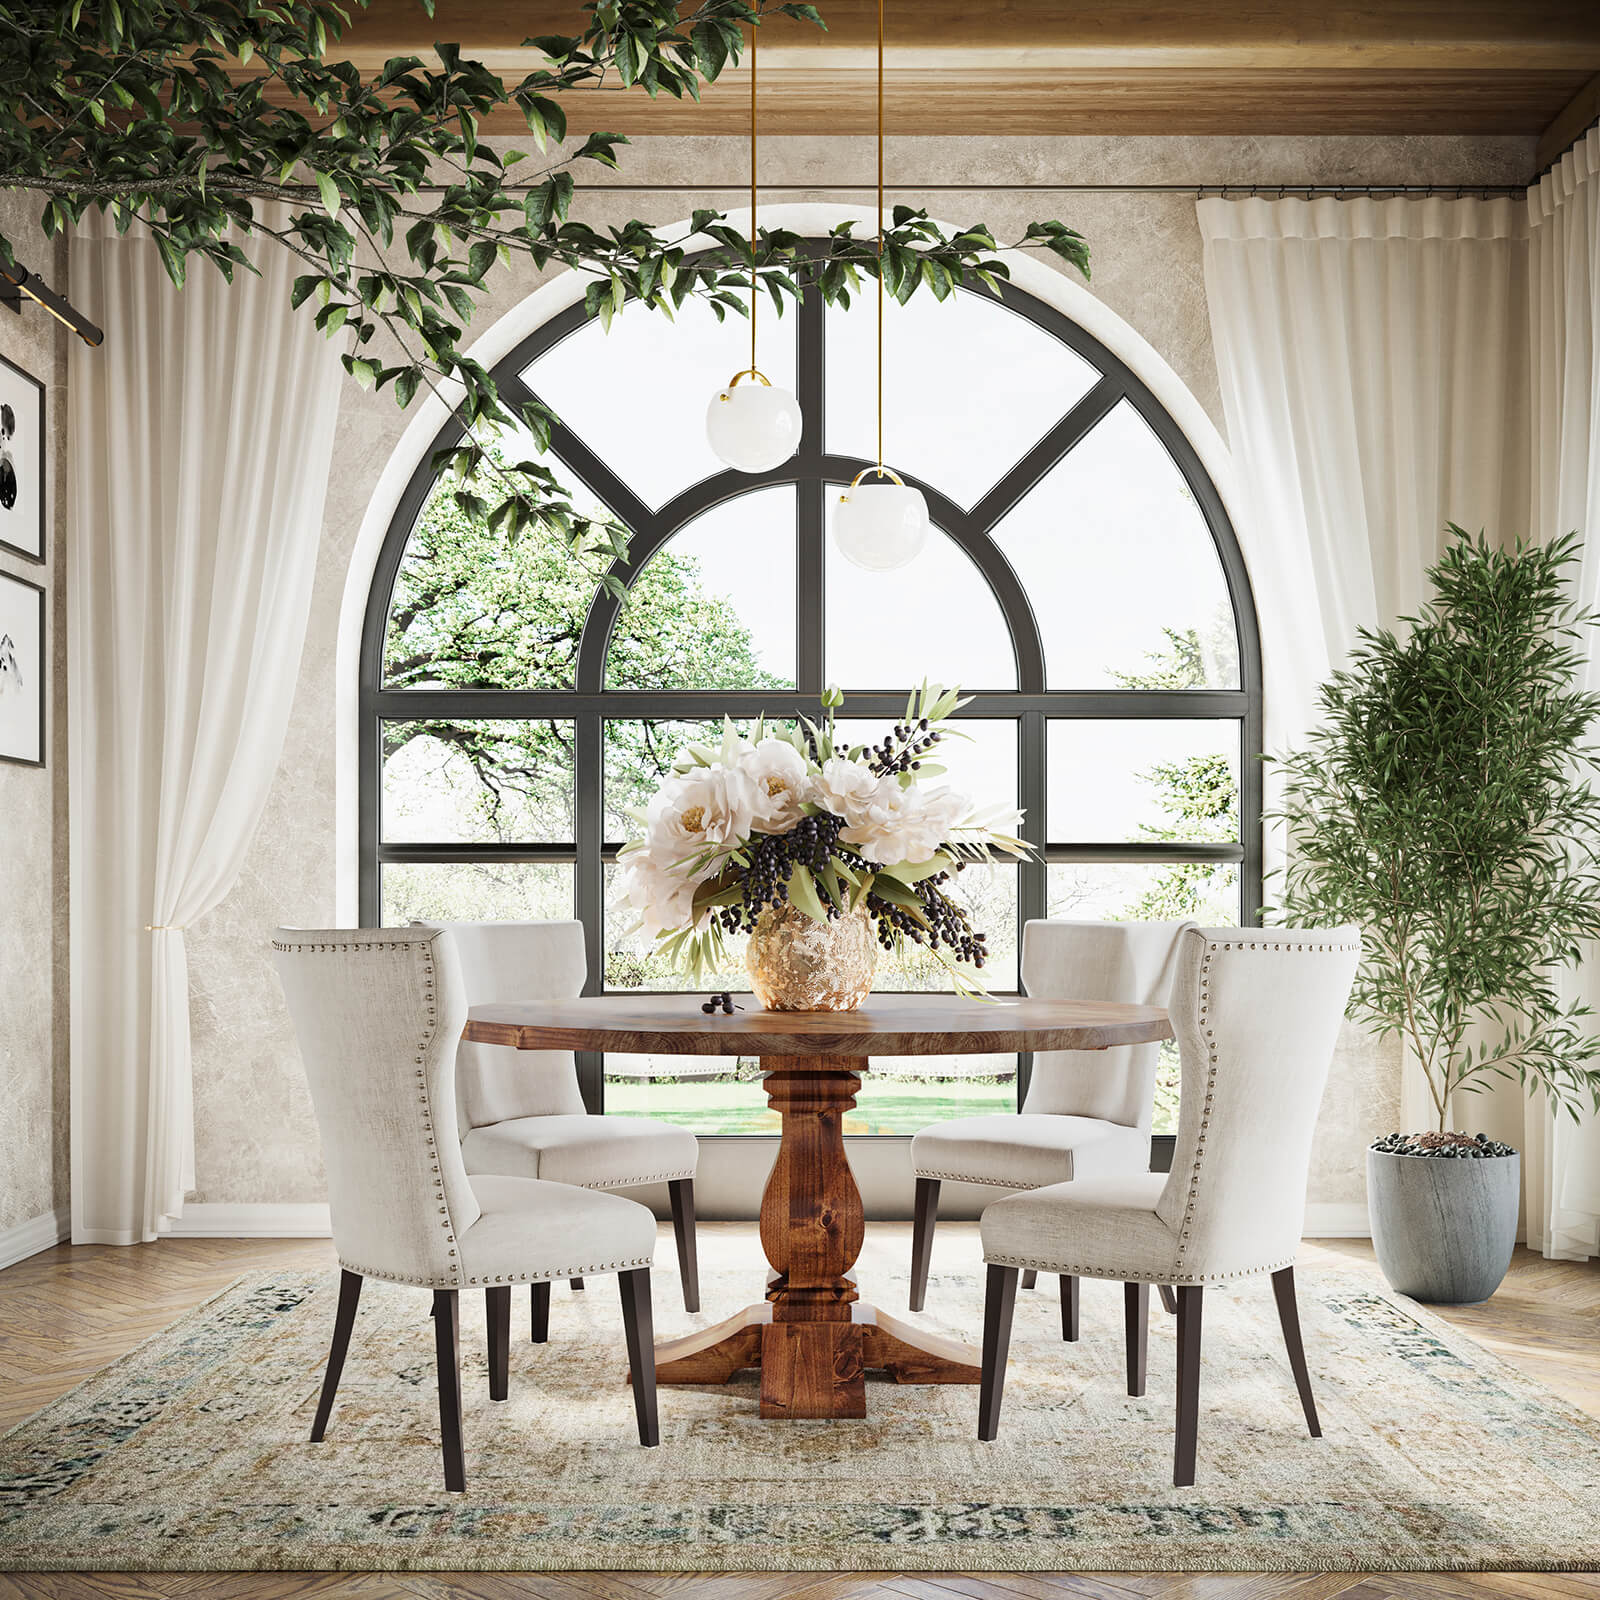 3D Render of Wooden Dining Table in Bright Country Interior